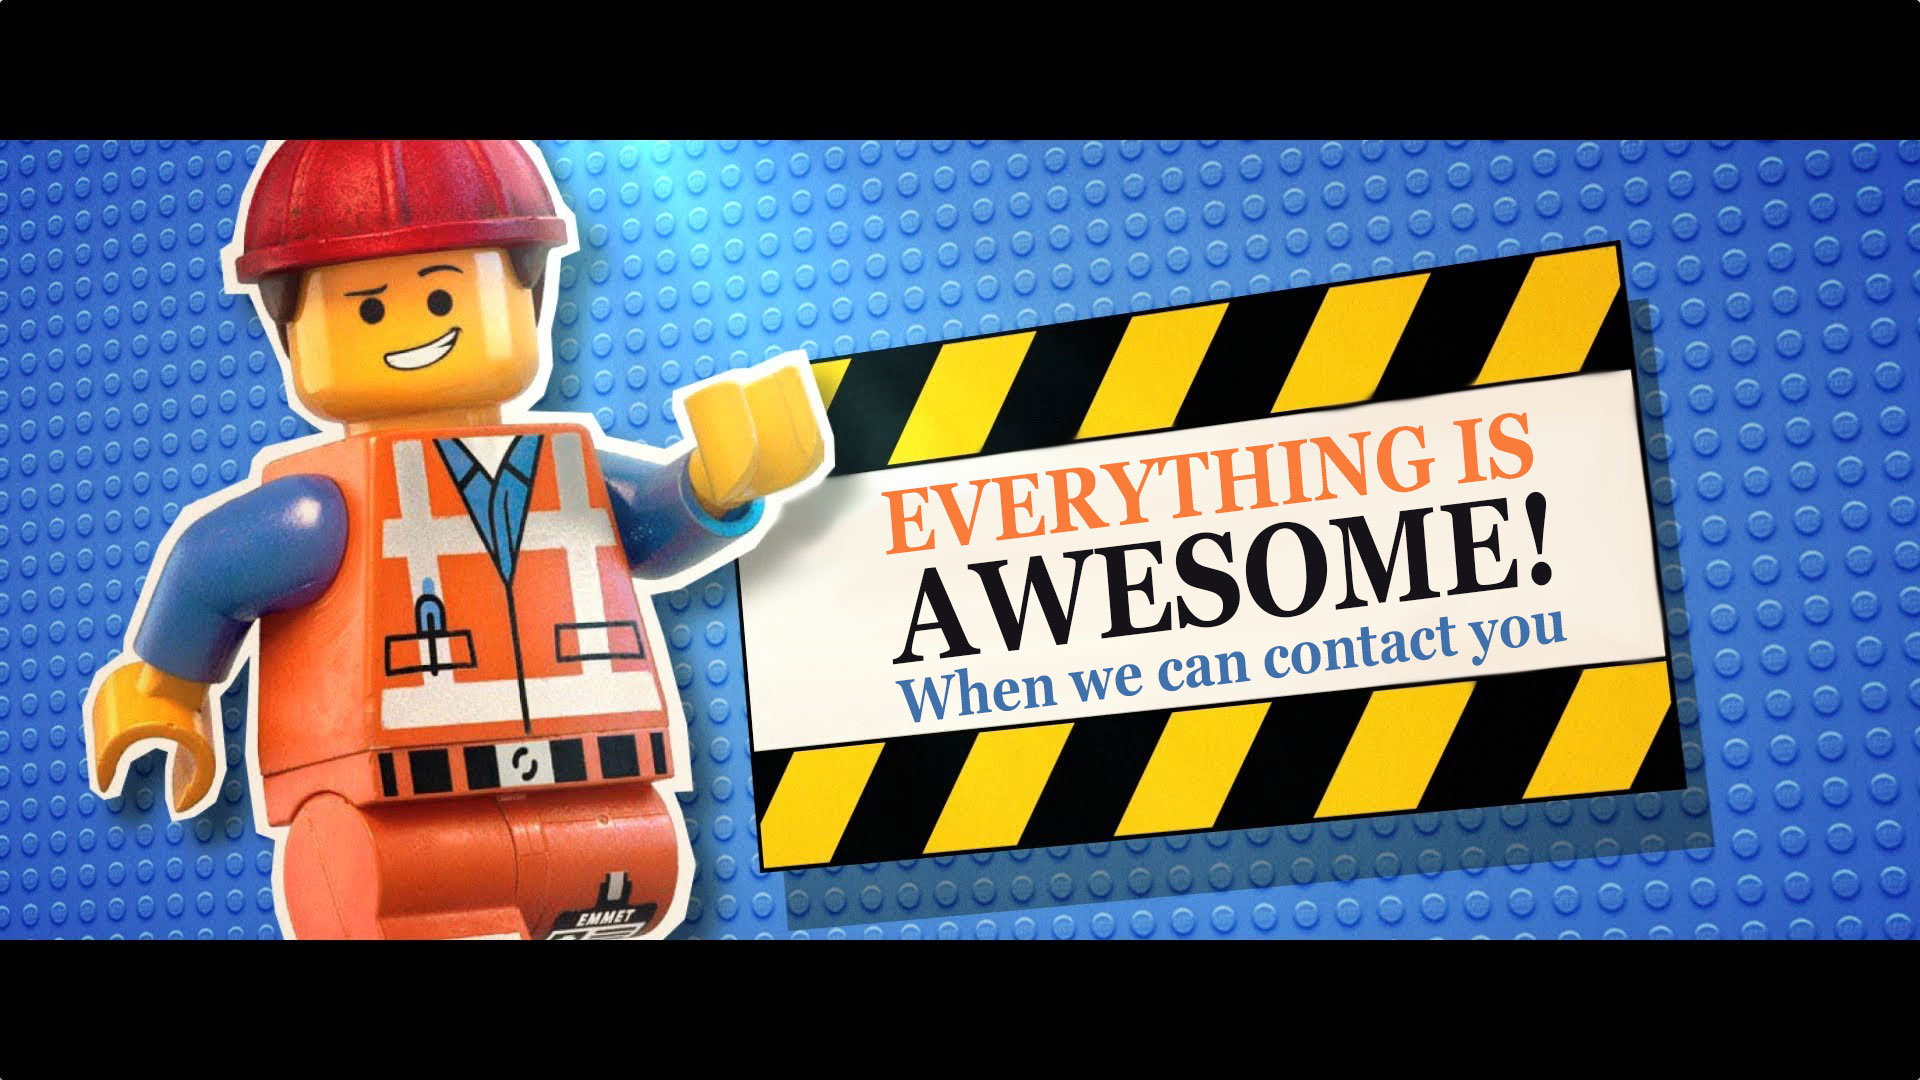 We'd love to stay in contact!  Update your details and you could WIN a Red Balloon Voucher or a LEGO mining truck!